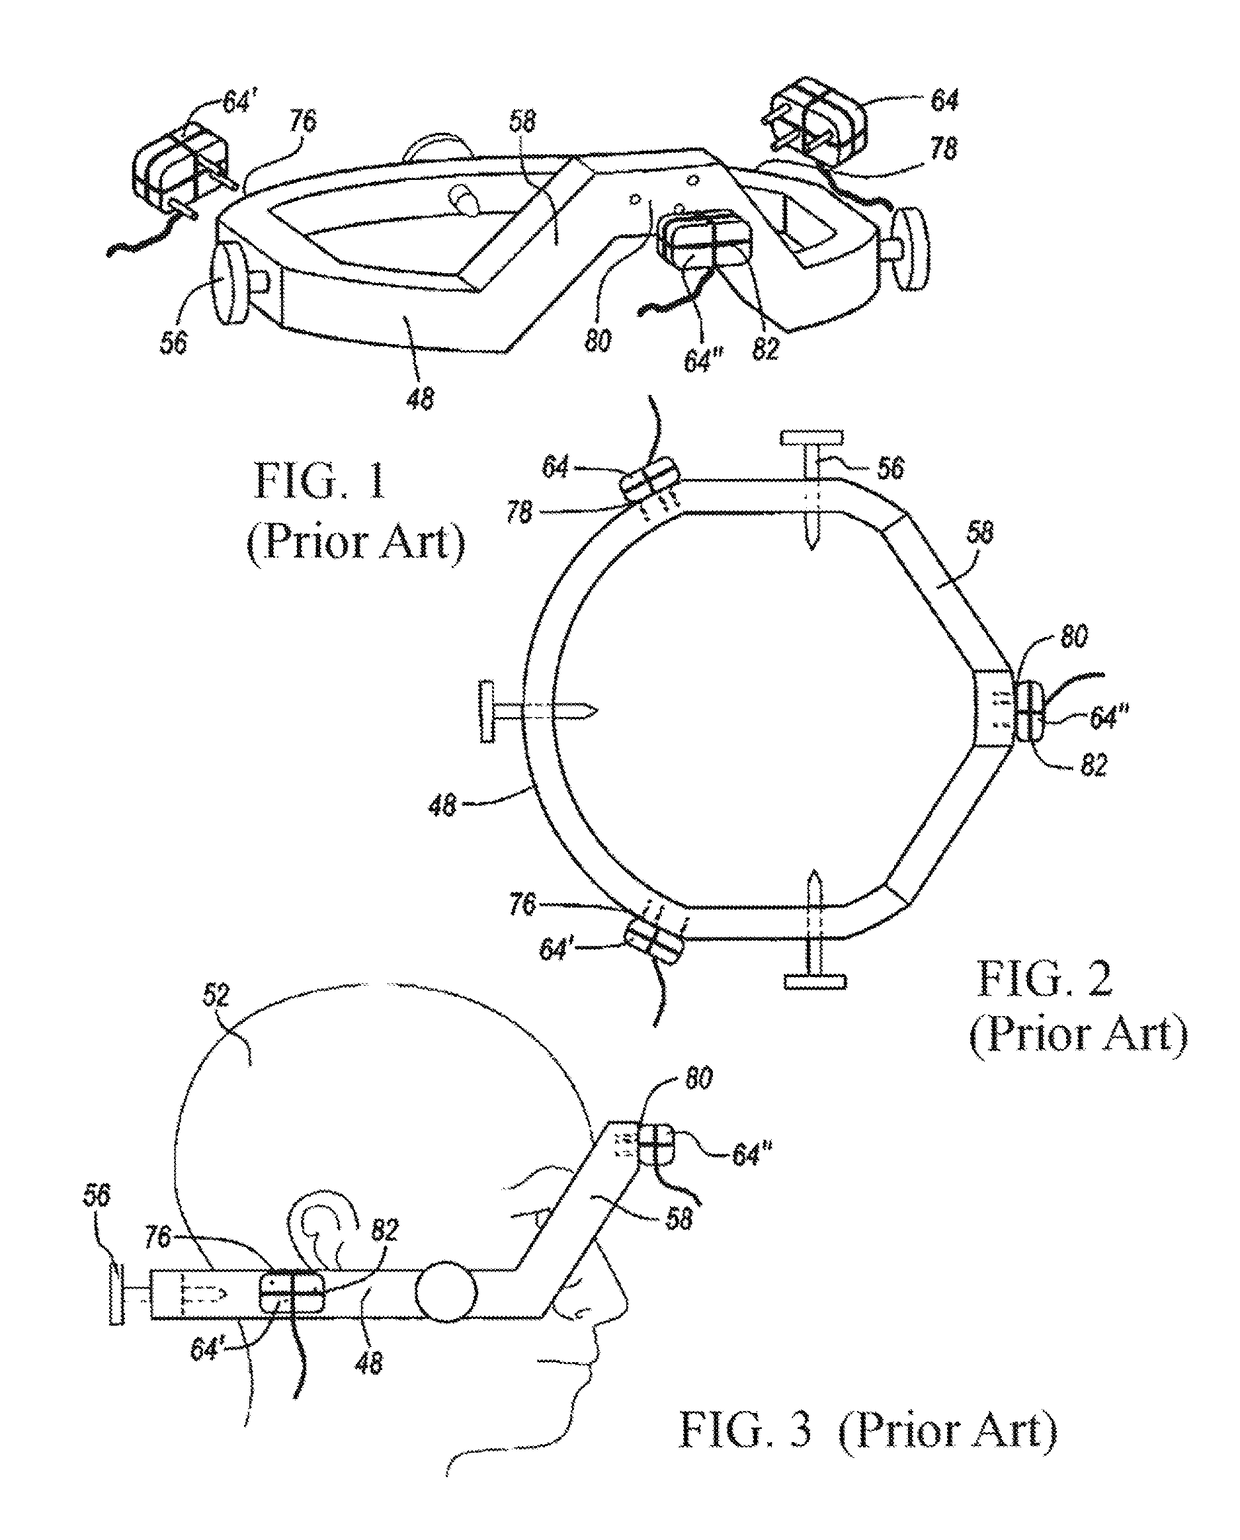 Method and device for positioning and stabilization of bony structures during maxillofacial surgery